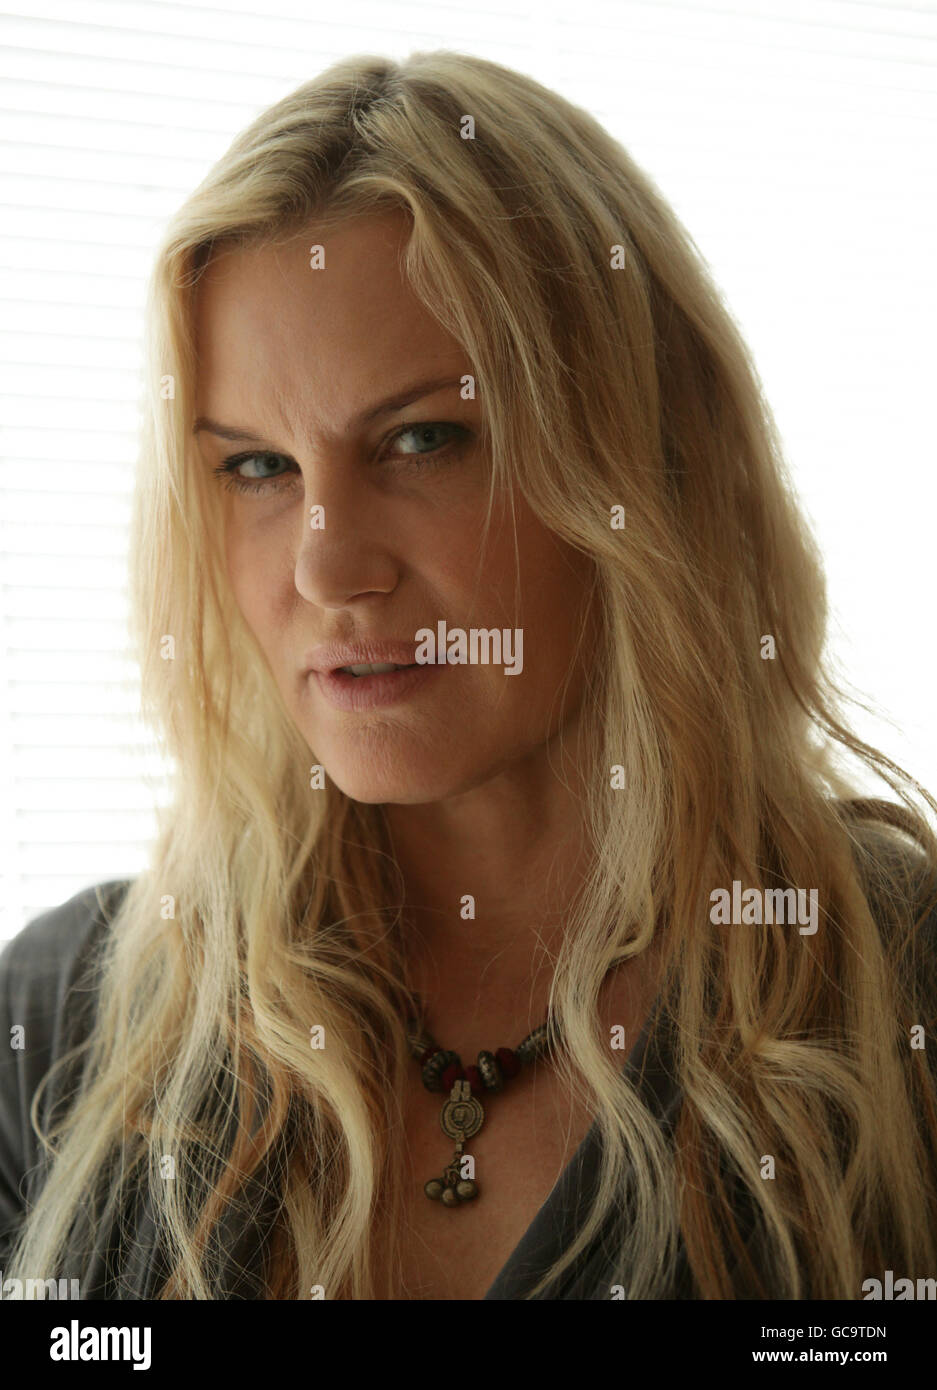 Daryl Hannah during a portrait session to promote her film 'A Closed Book', at St Martin's Lane Hotel in London. PRESS ASSOCIATION Photo. Picture date: Wednesday February 3, 2010. Photo credit should read: Yui Mok/PA Stock Photo